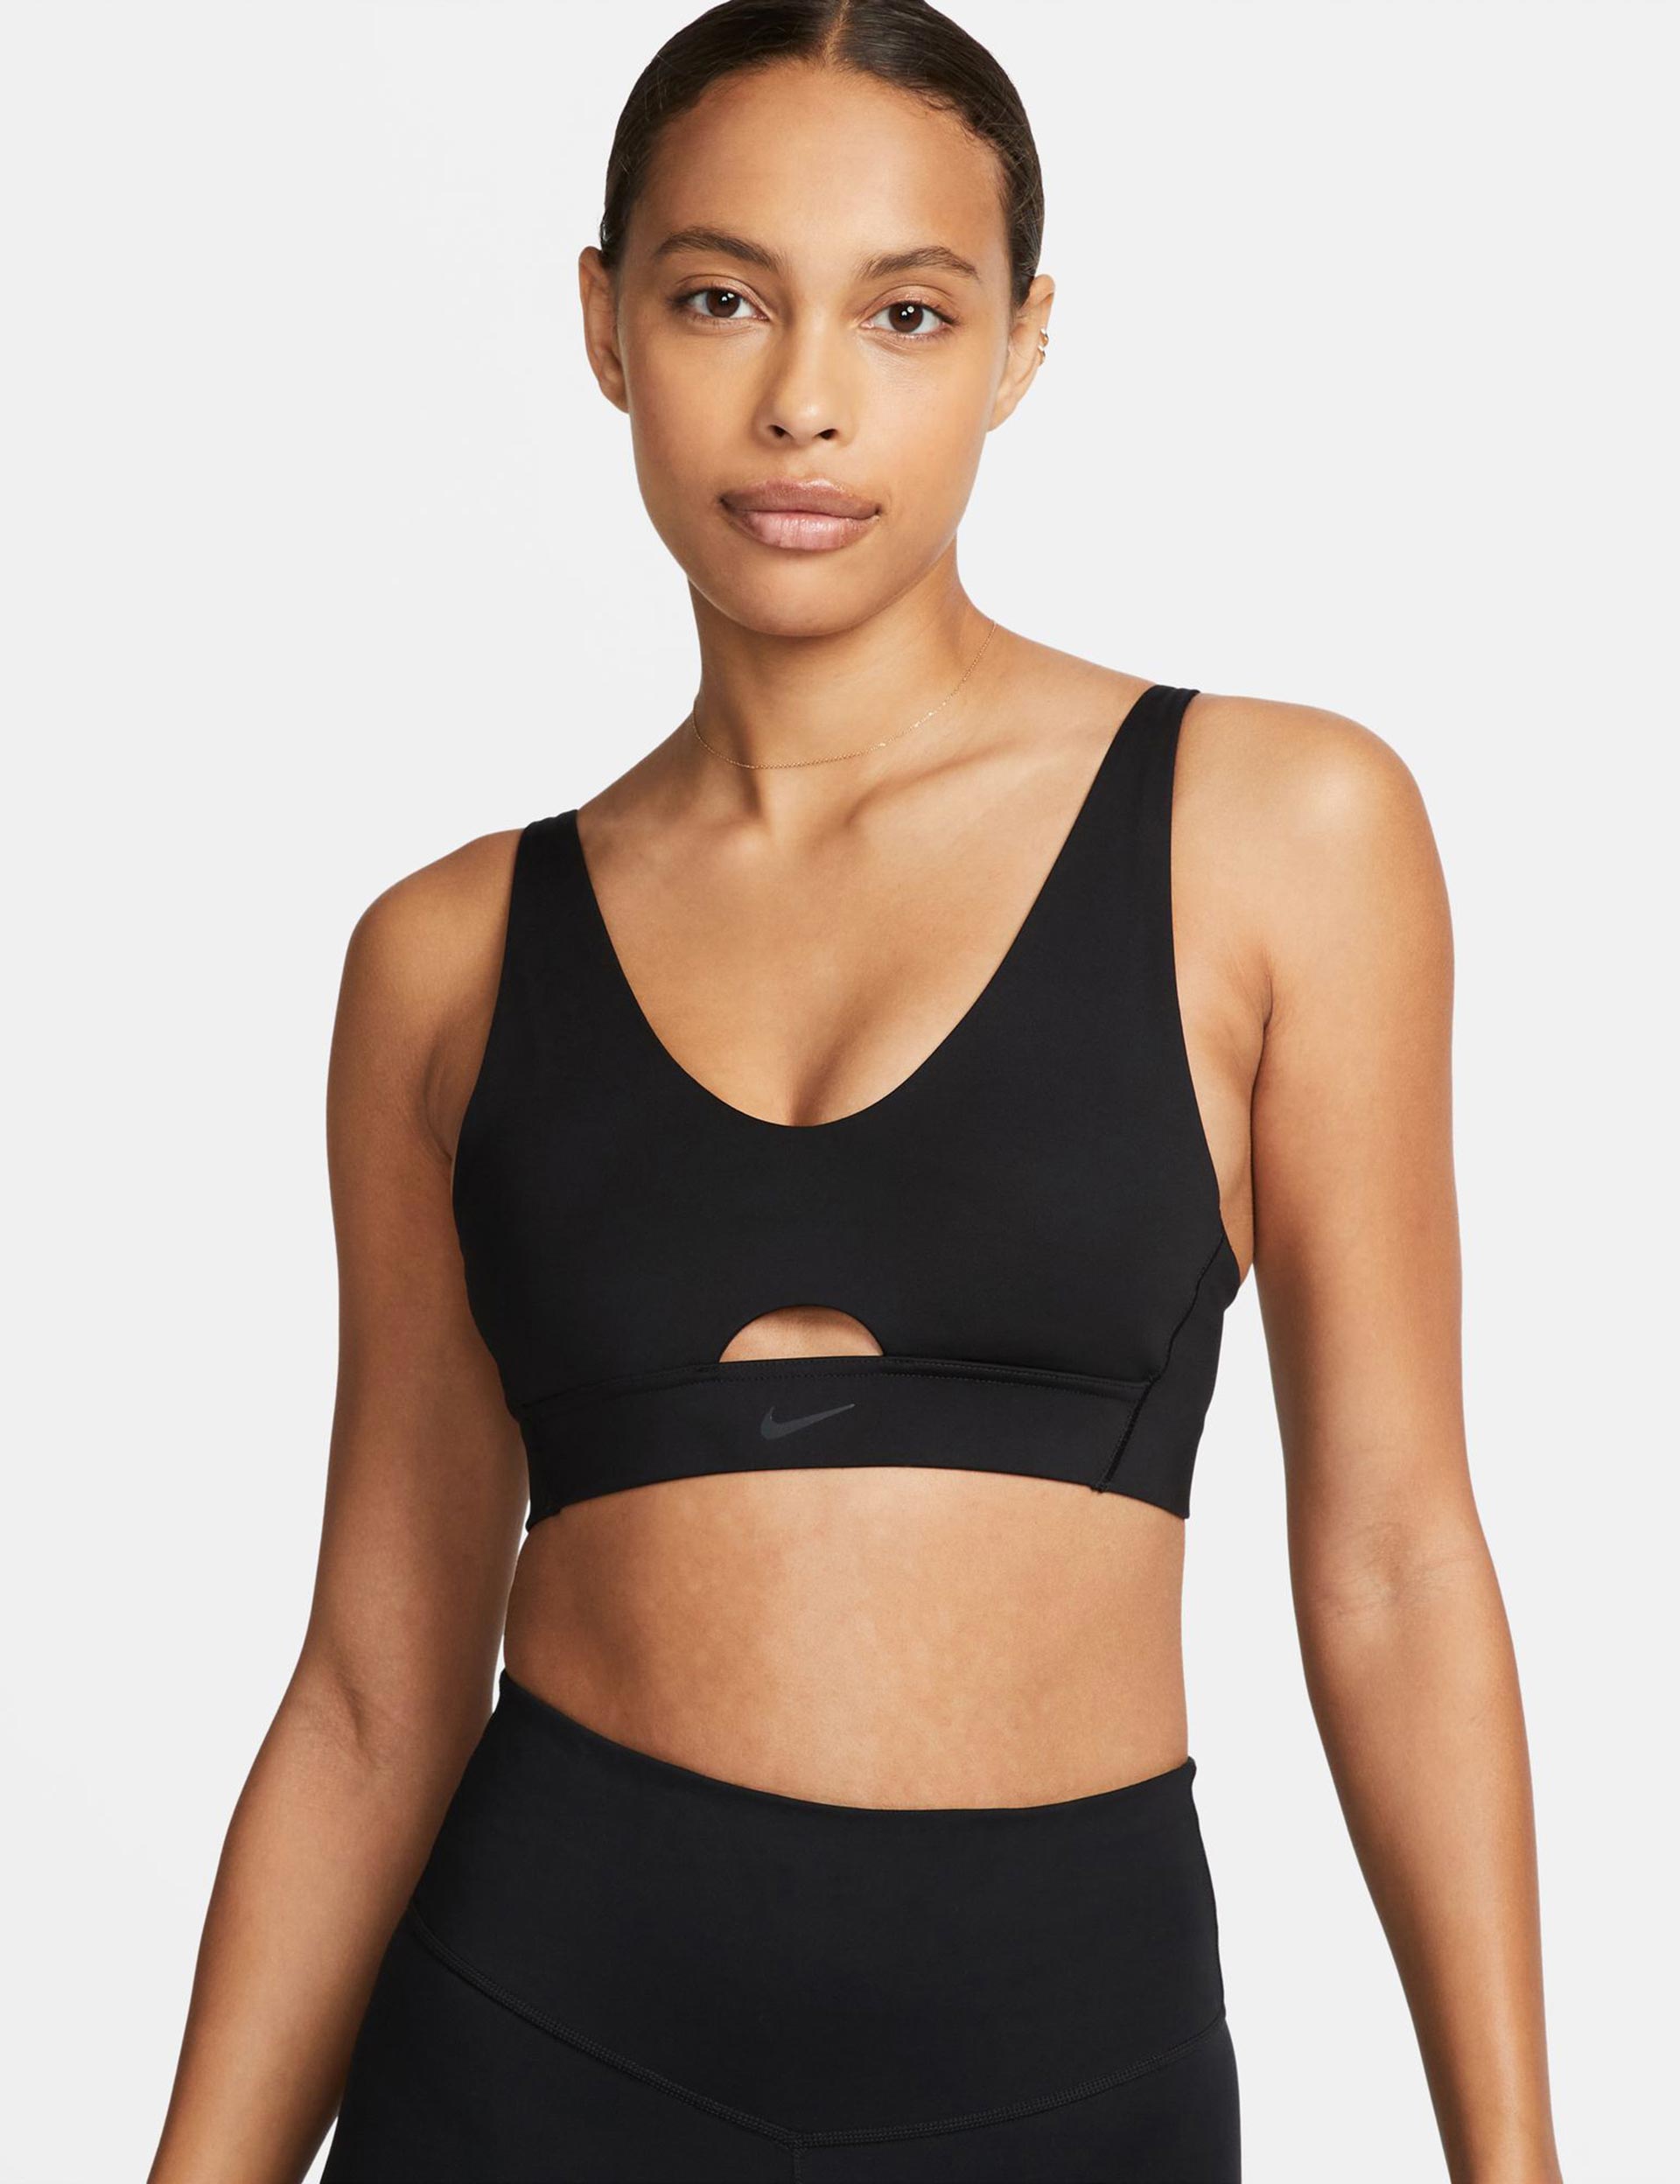 Forever 21 Women's Active Seamless Strappy Sports Bra in Dark Grey Large